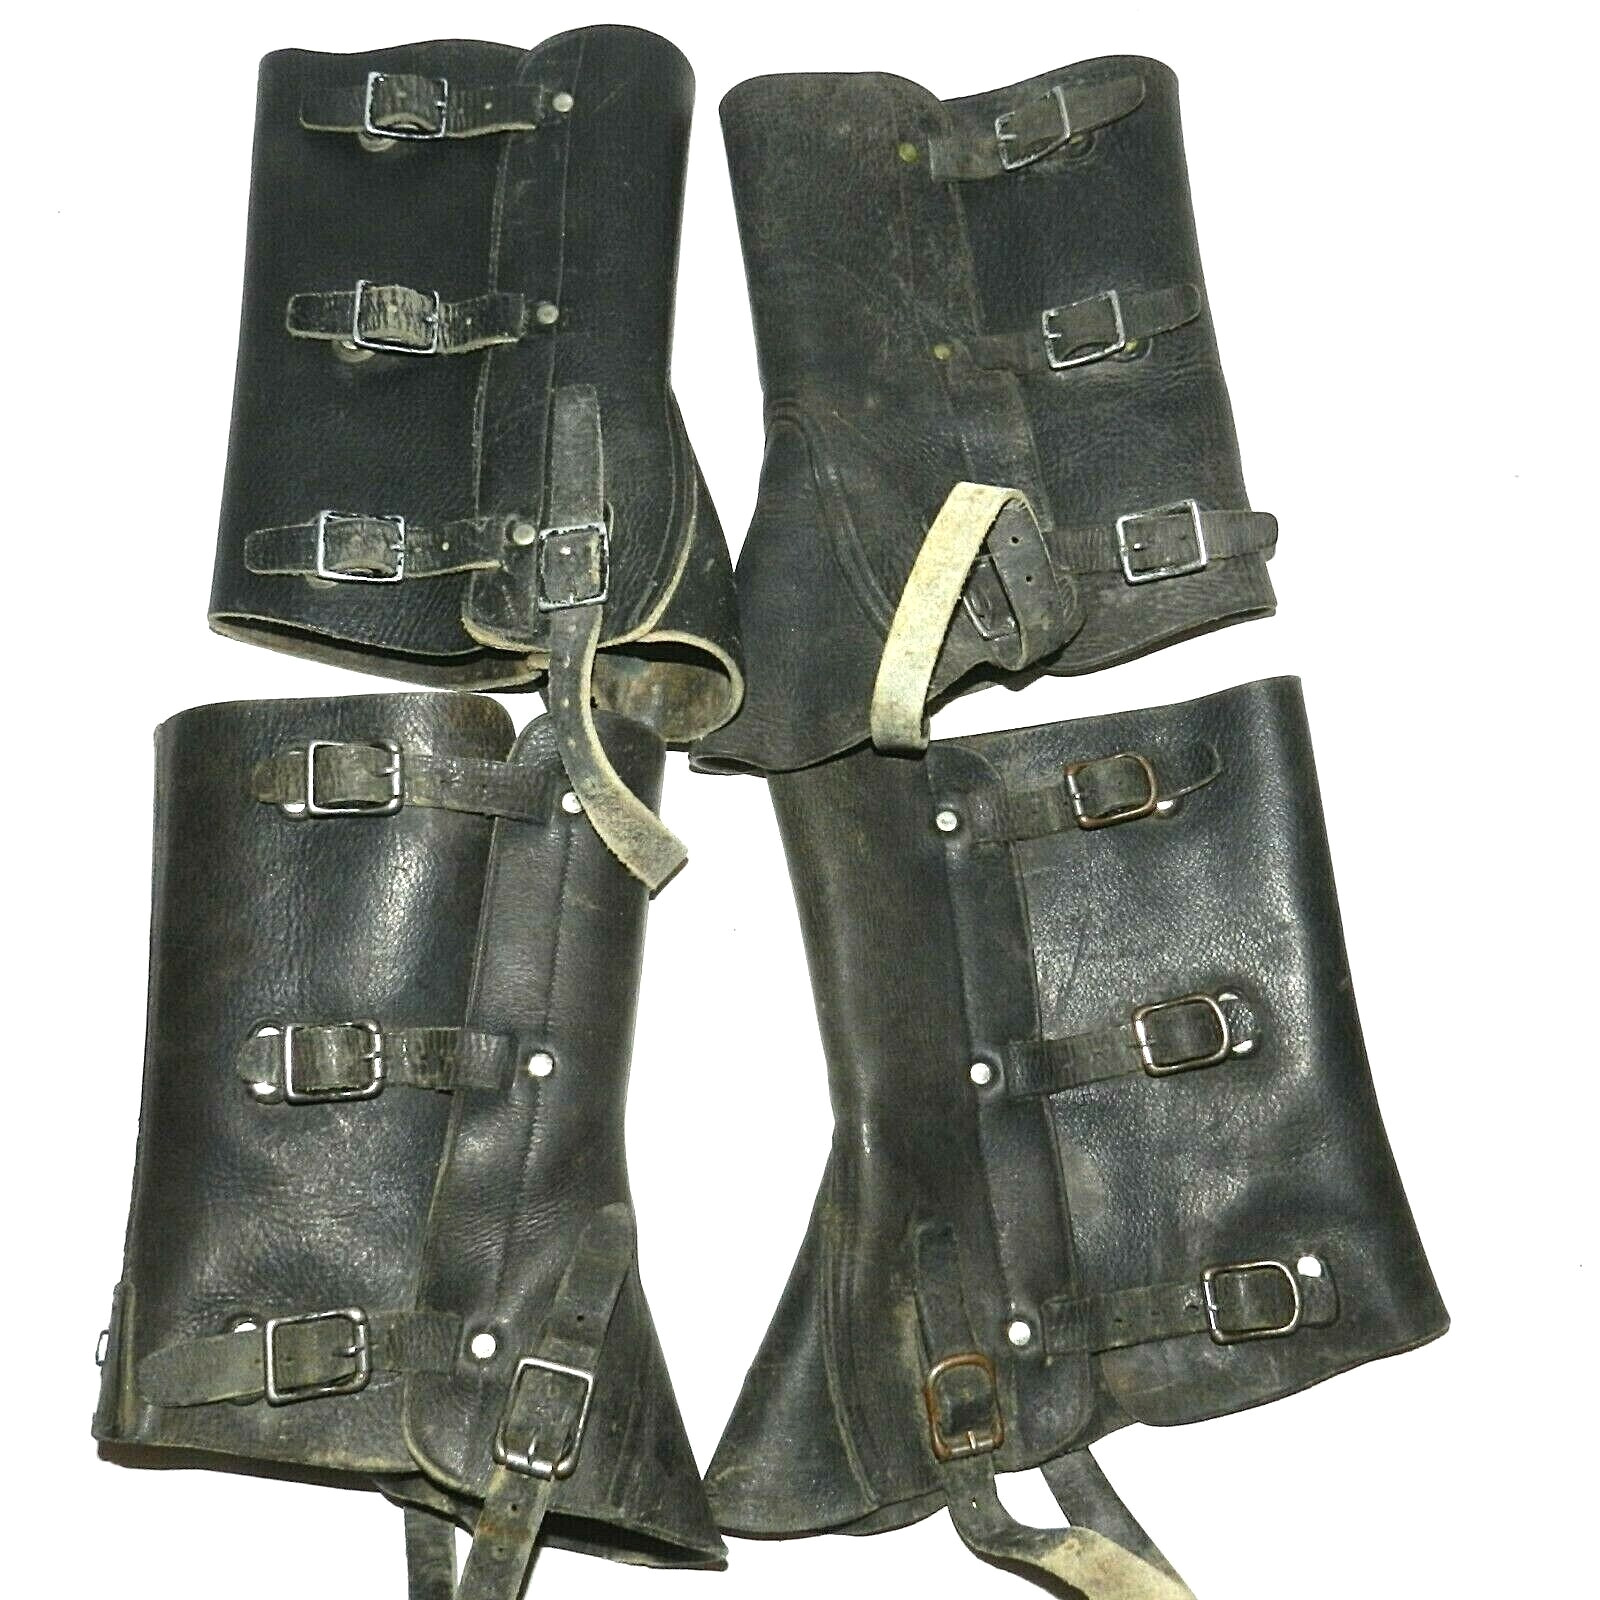 4 Swiss Army Spats 1957/1958/1968,1969, Black Leather Boot Gaiters Very Rare